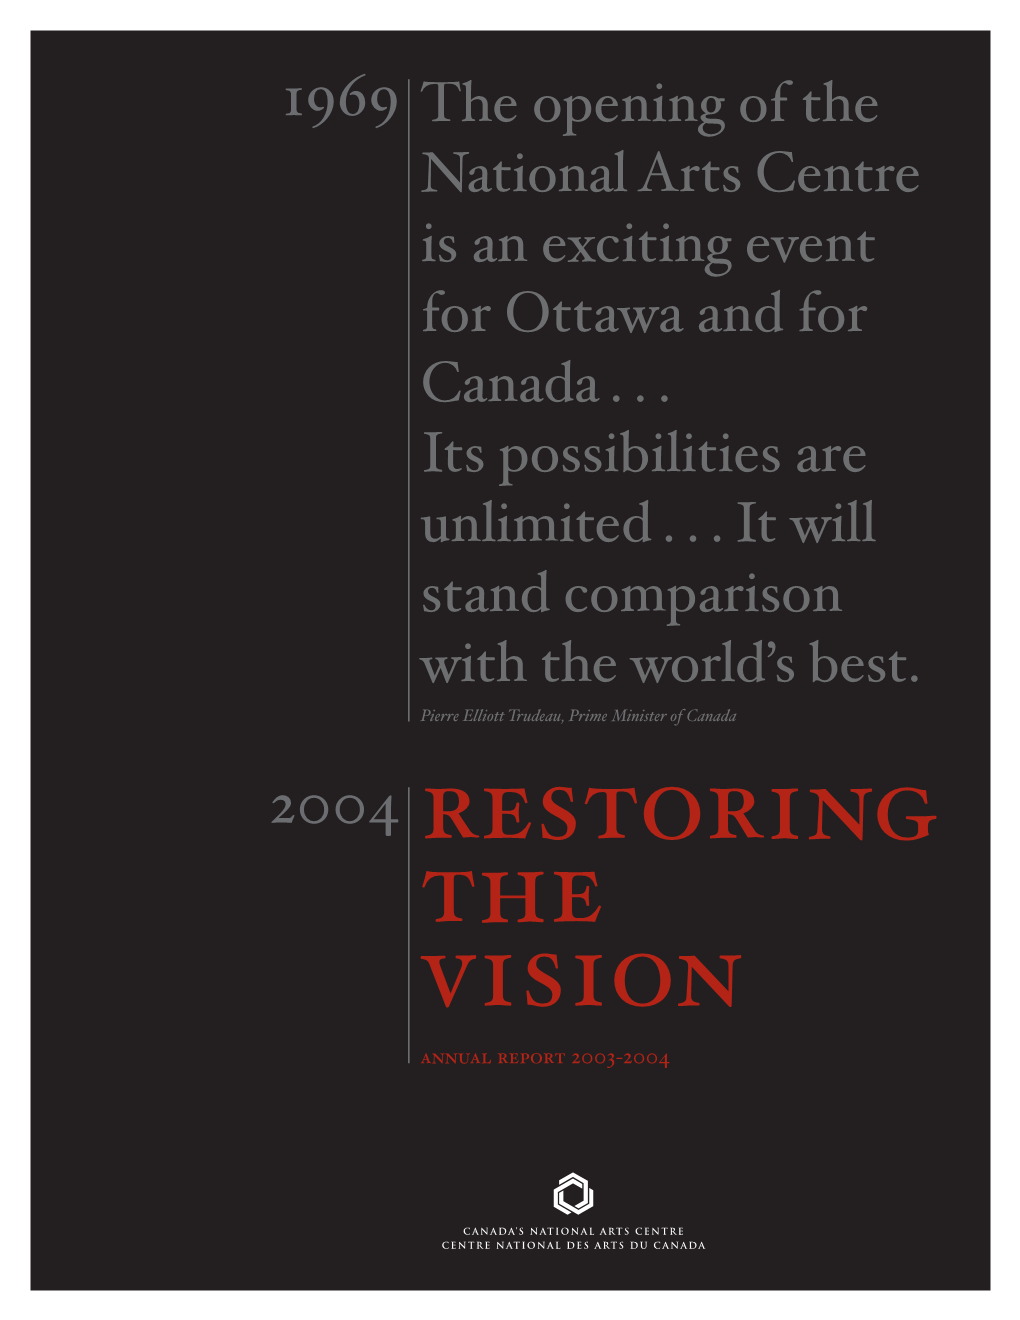 Annual Report 2003-2004 in Memory of Mitchell Sharp